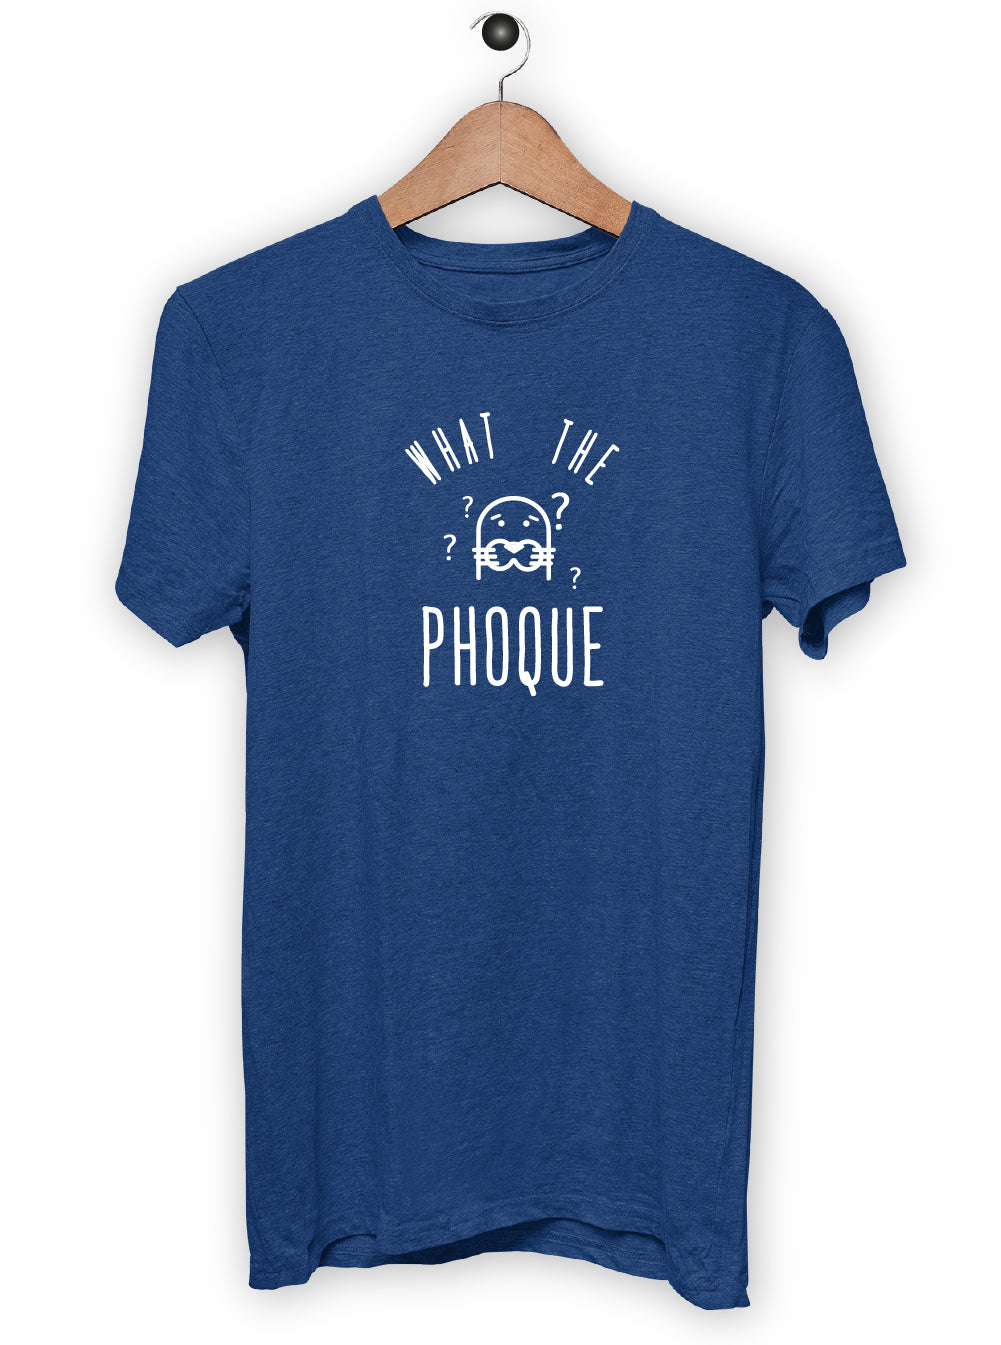 T-Shirt "WHAT THE PHOQUE"